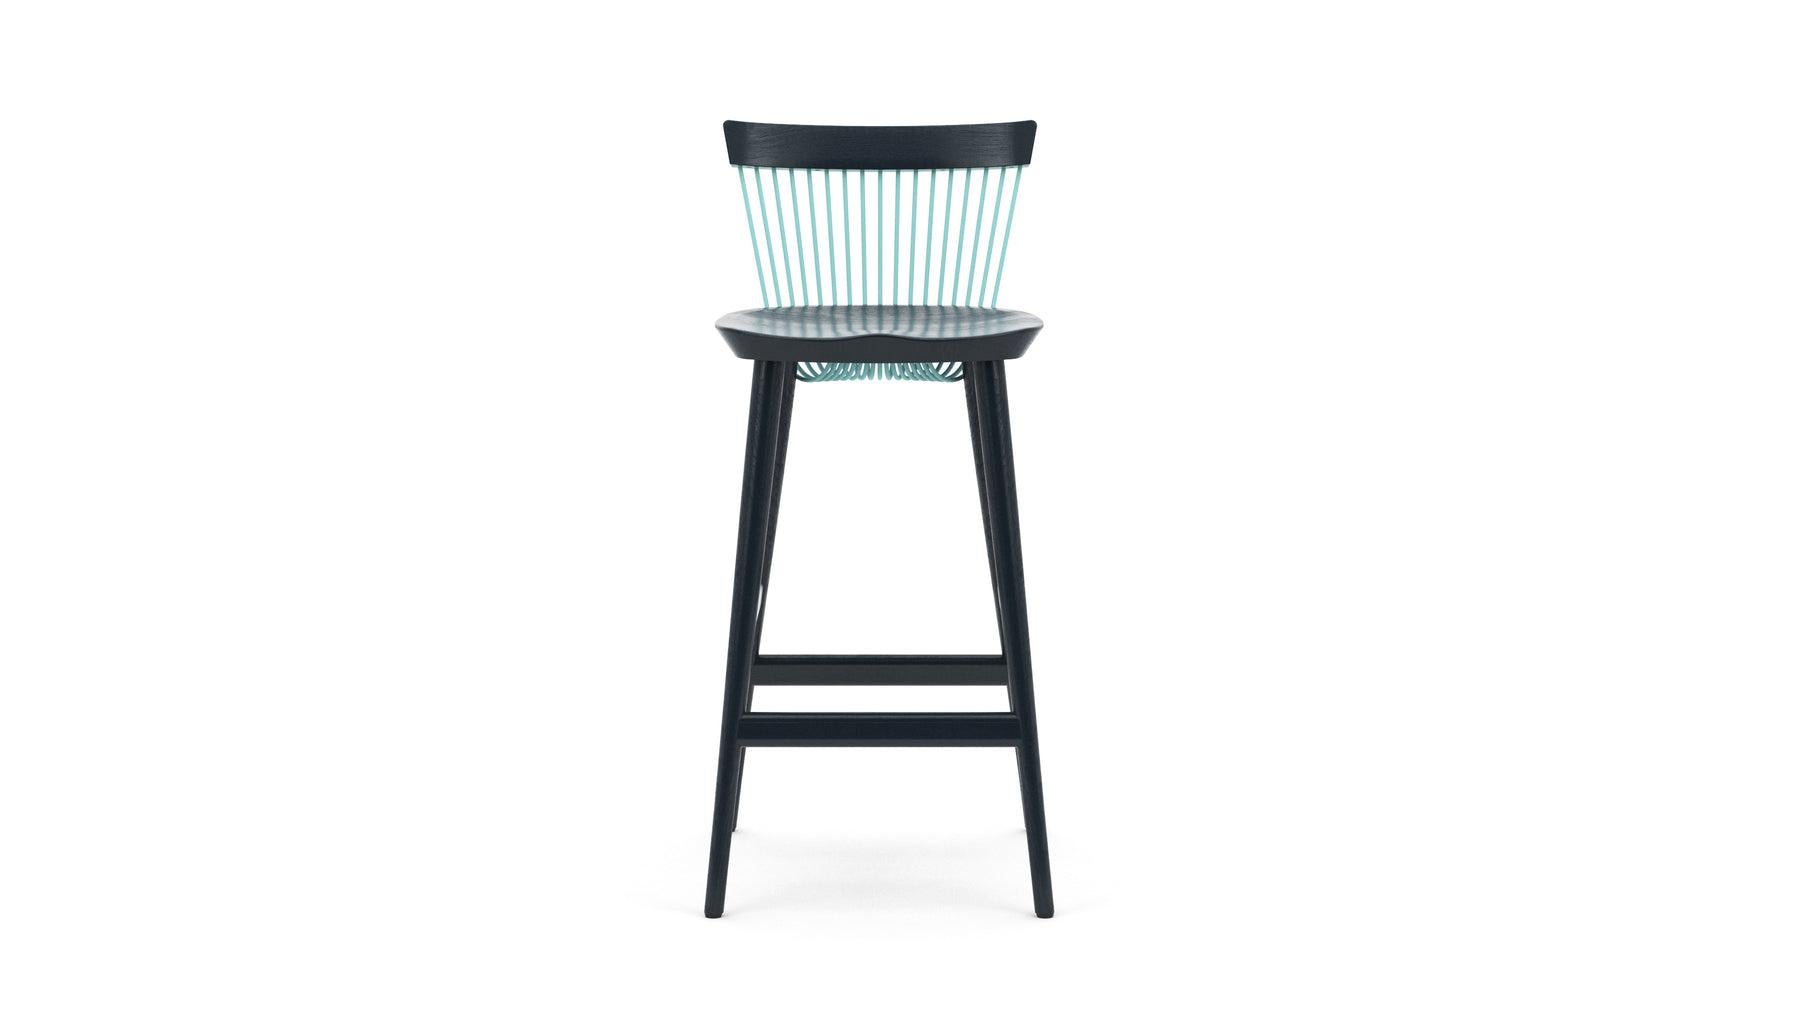 British Ww Bar Stool CS6, Stained Oak & Powder Coated Metal Rods For Sale